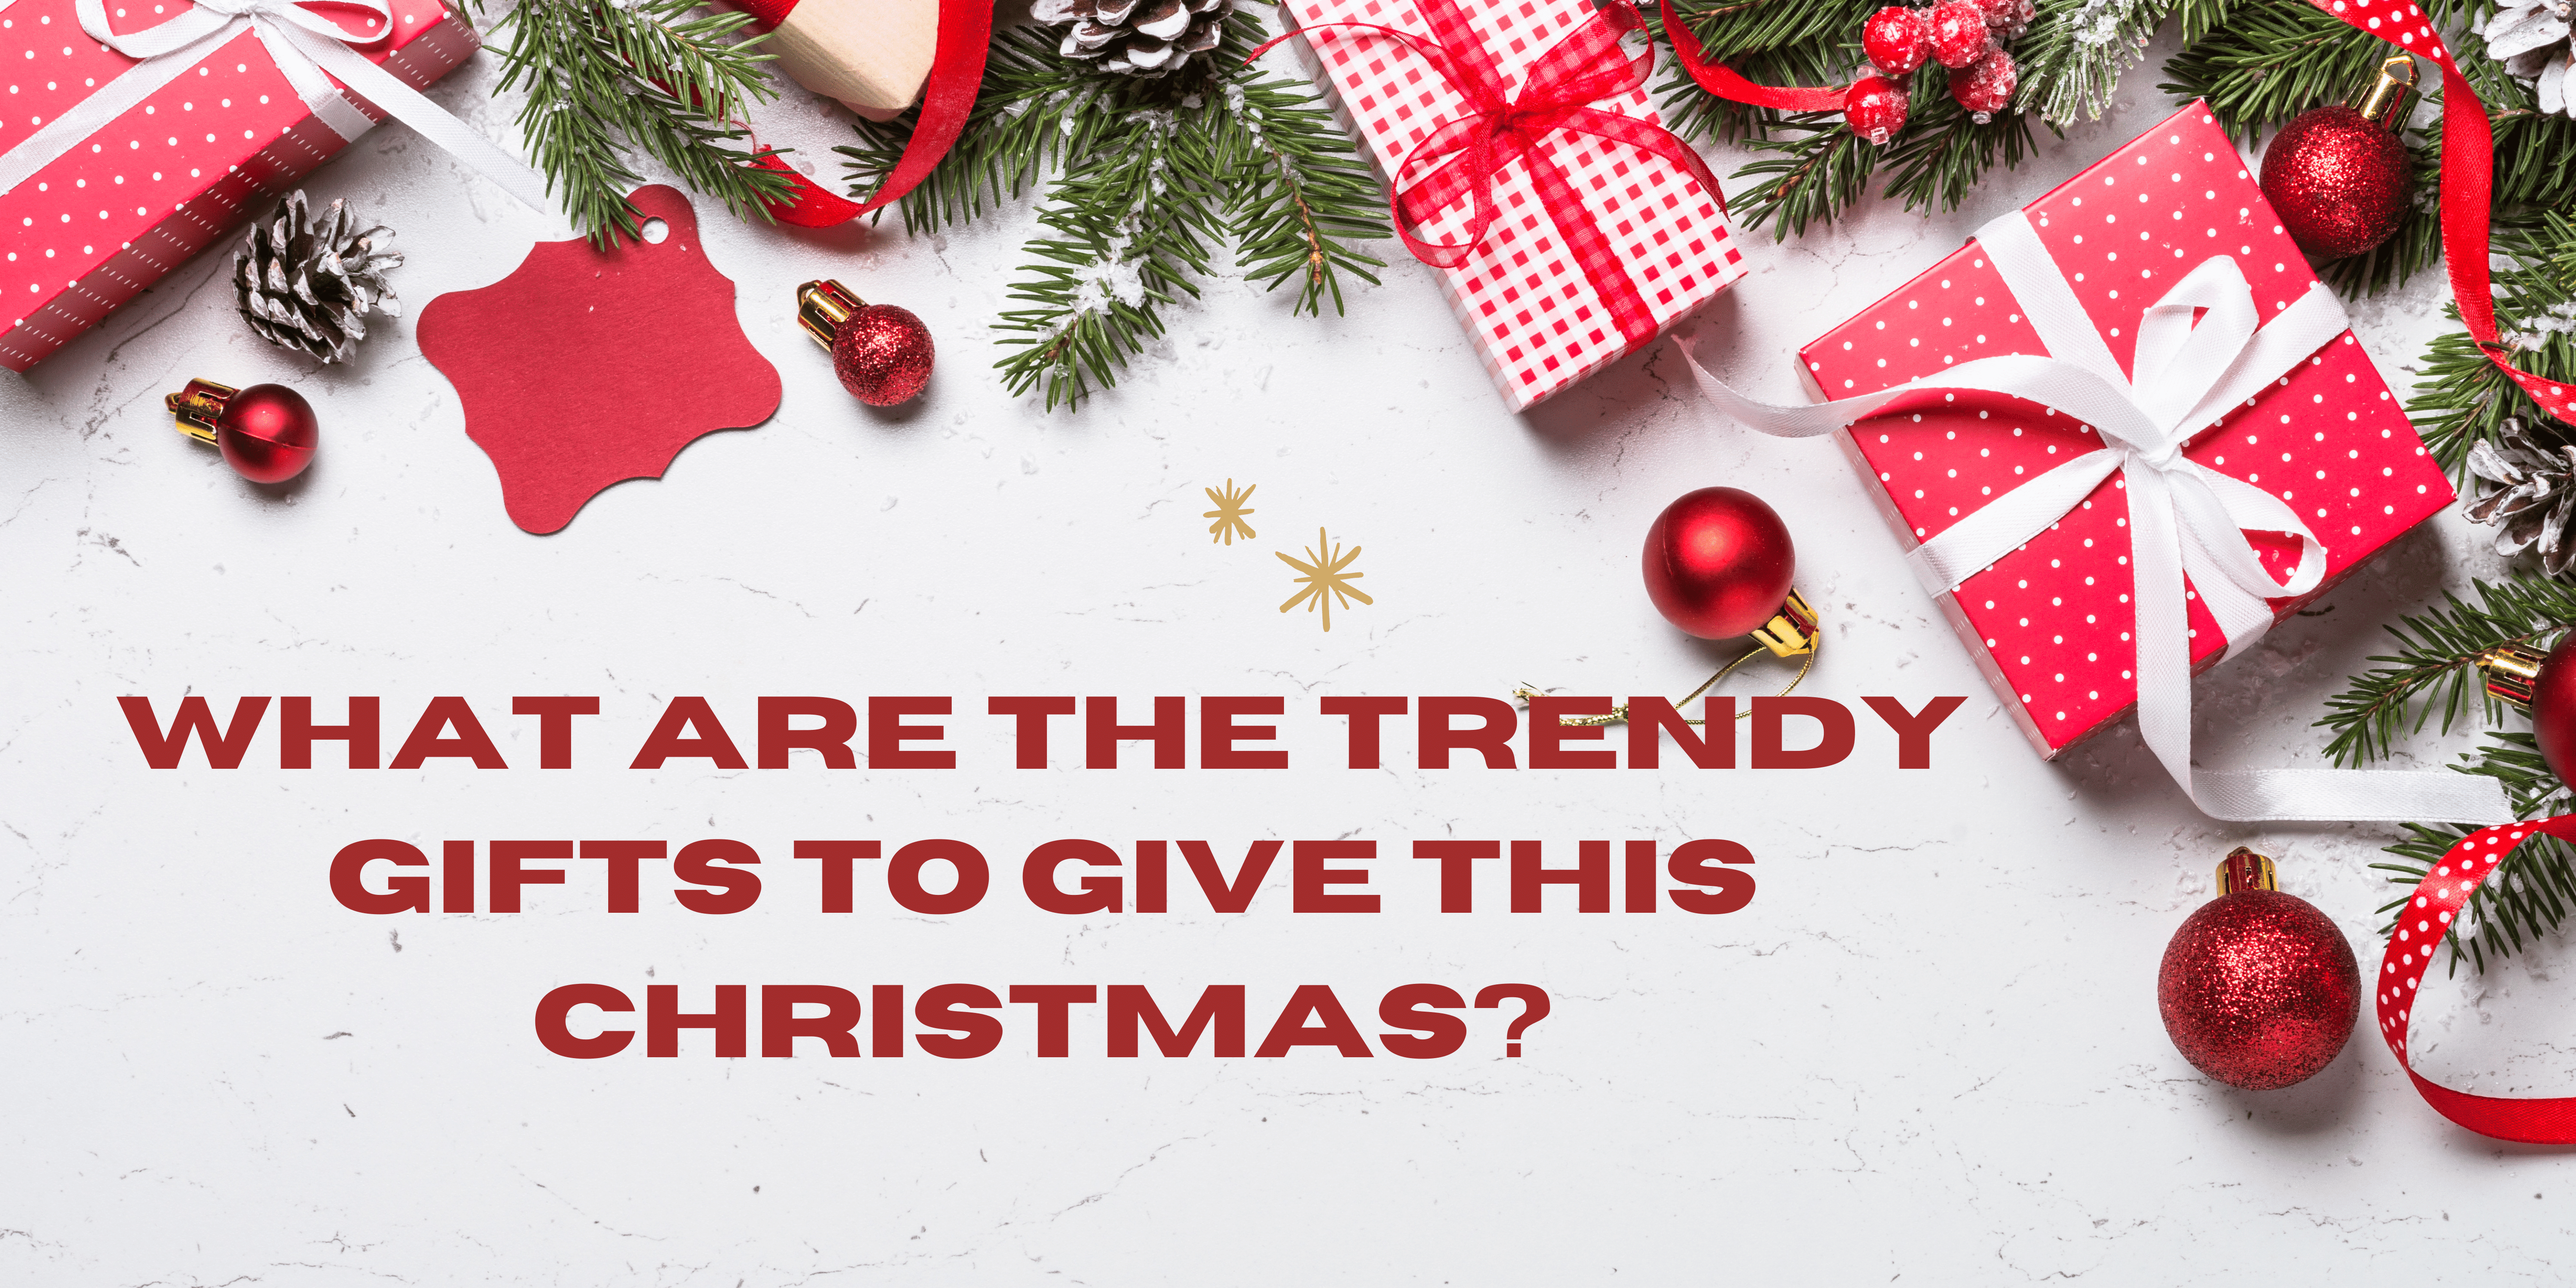 The Modern Gift Project: What are the Trendy Gifts to Give this Christmas?